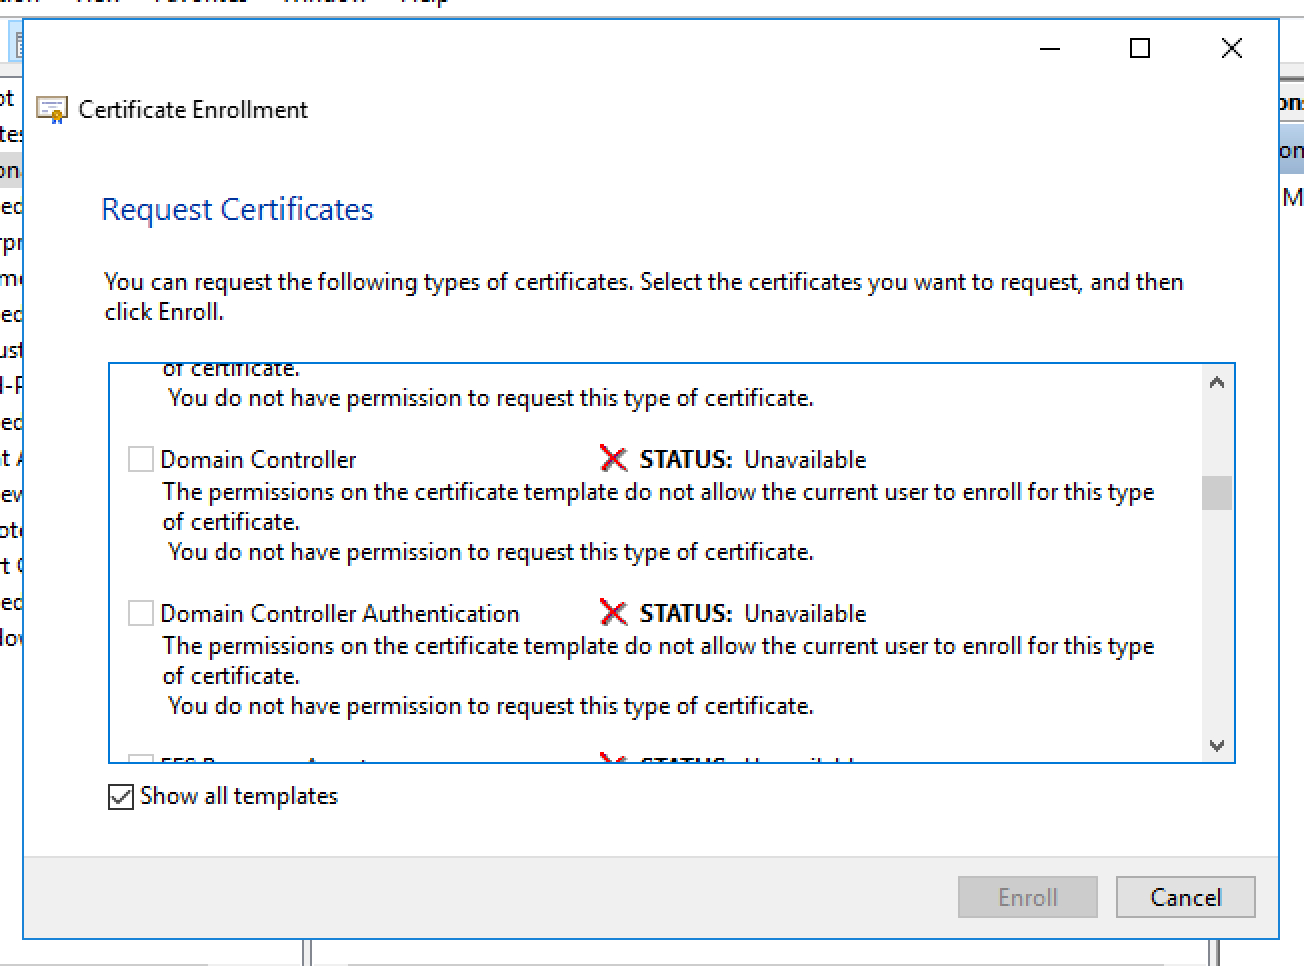 Unable To Request New Certificate From Nps Server With Domain Controller Certificate Template